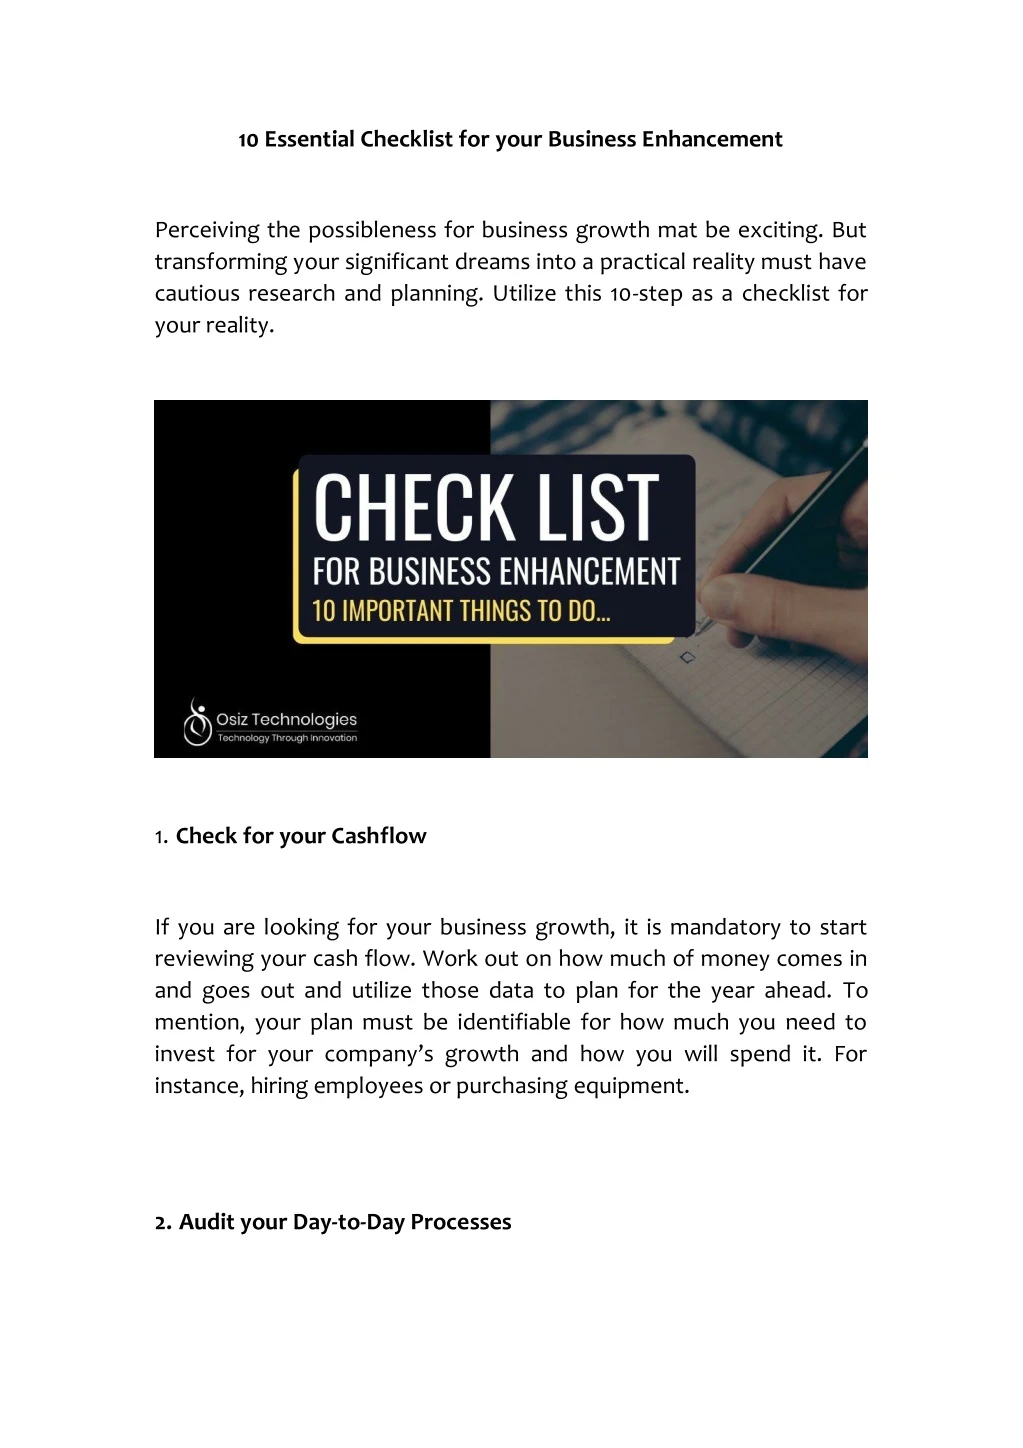 10 essential checklist for your business